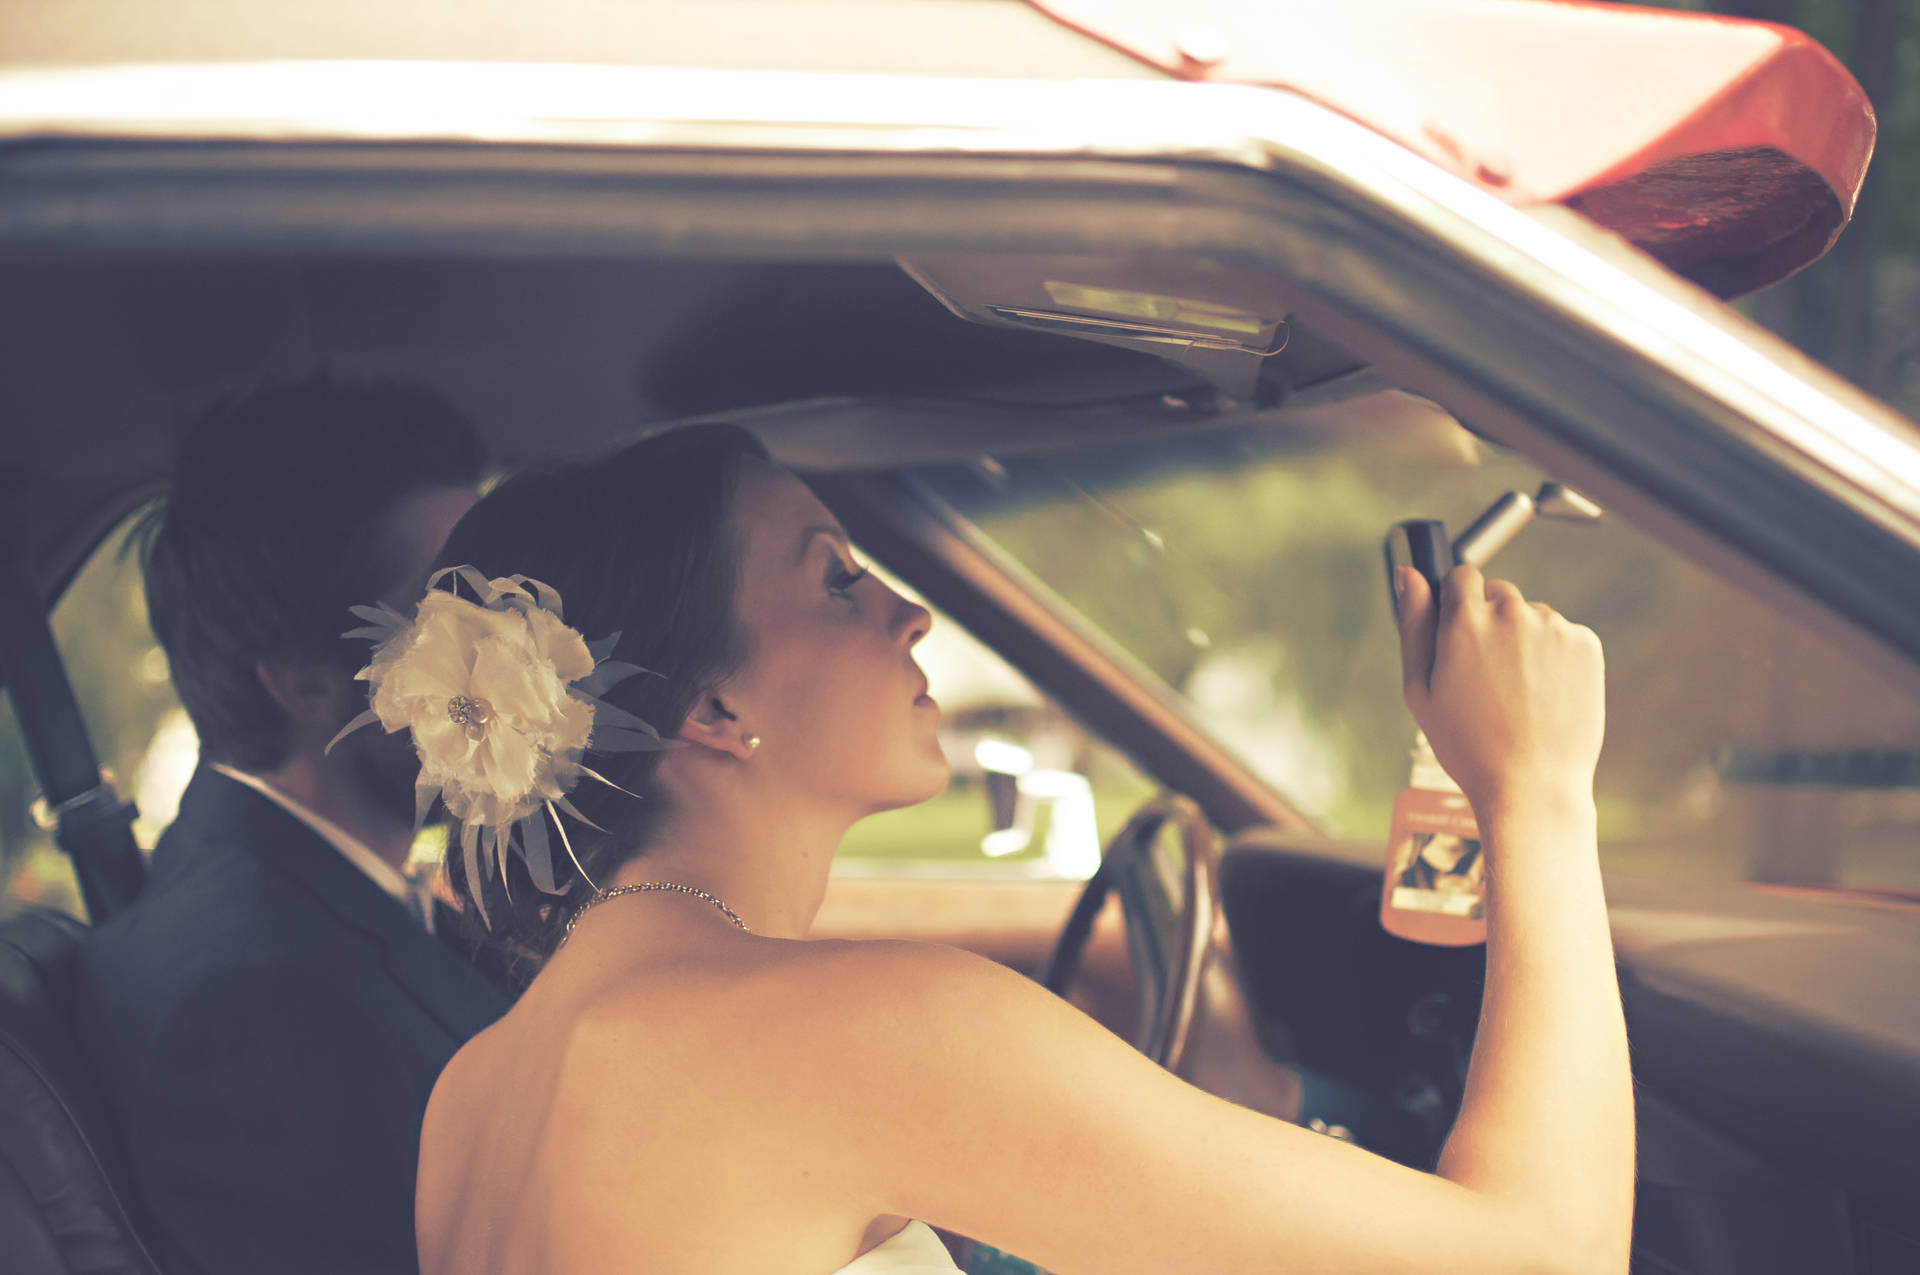 Groom And Bride In The Car Wallpaper